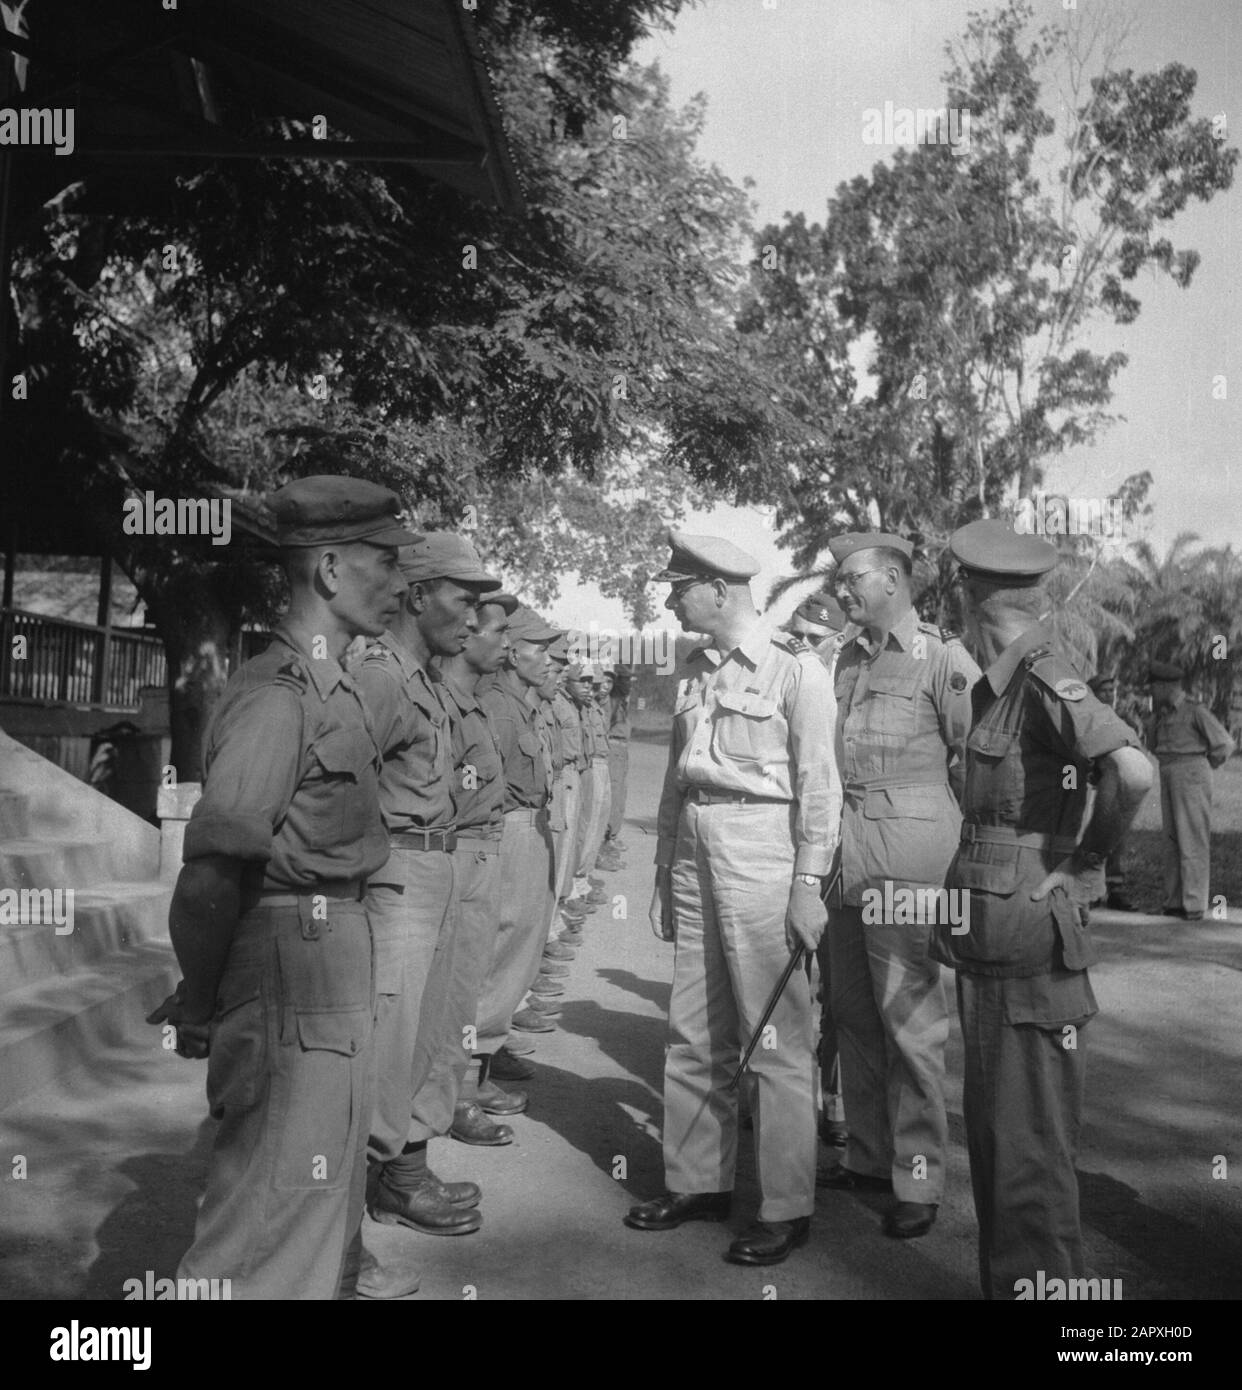 General Rail in Palembang:Posts in West Sumatra  Rail inspects a division of battalion Gajah Merah. Behind him Colonel Mollinger Annotation: Is there a mistake in series? Date: 1947/01/01 Location: Indonesia, Dutch East Indies Stock Photo